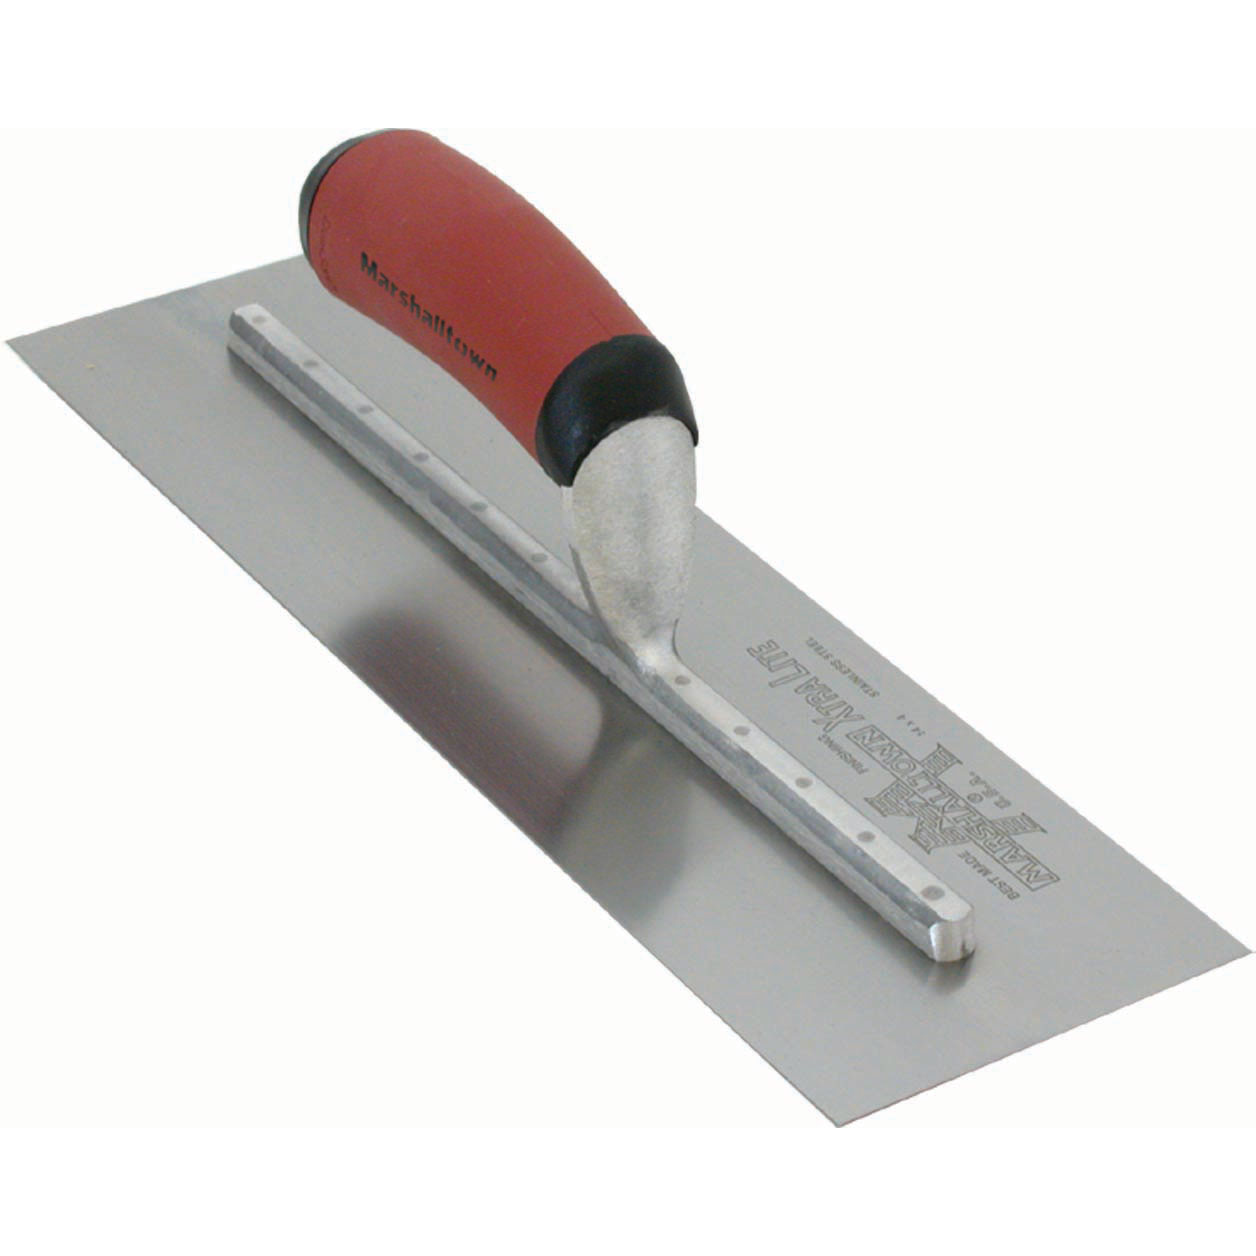 Marshalltown MXS66D 16in. x 4in. High Carbon Steel Finishing Trowel with DuraSoft MAT-MXS66D